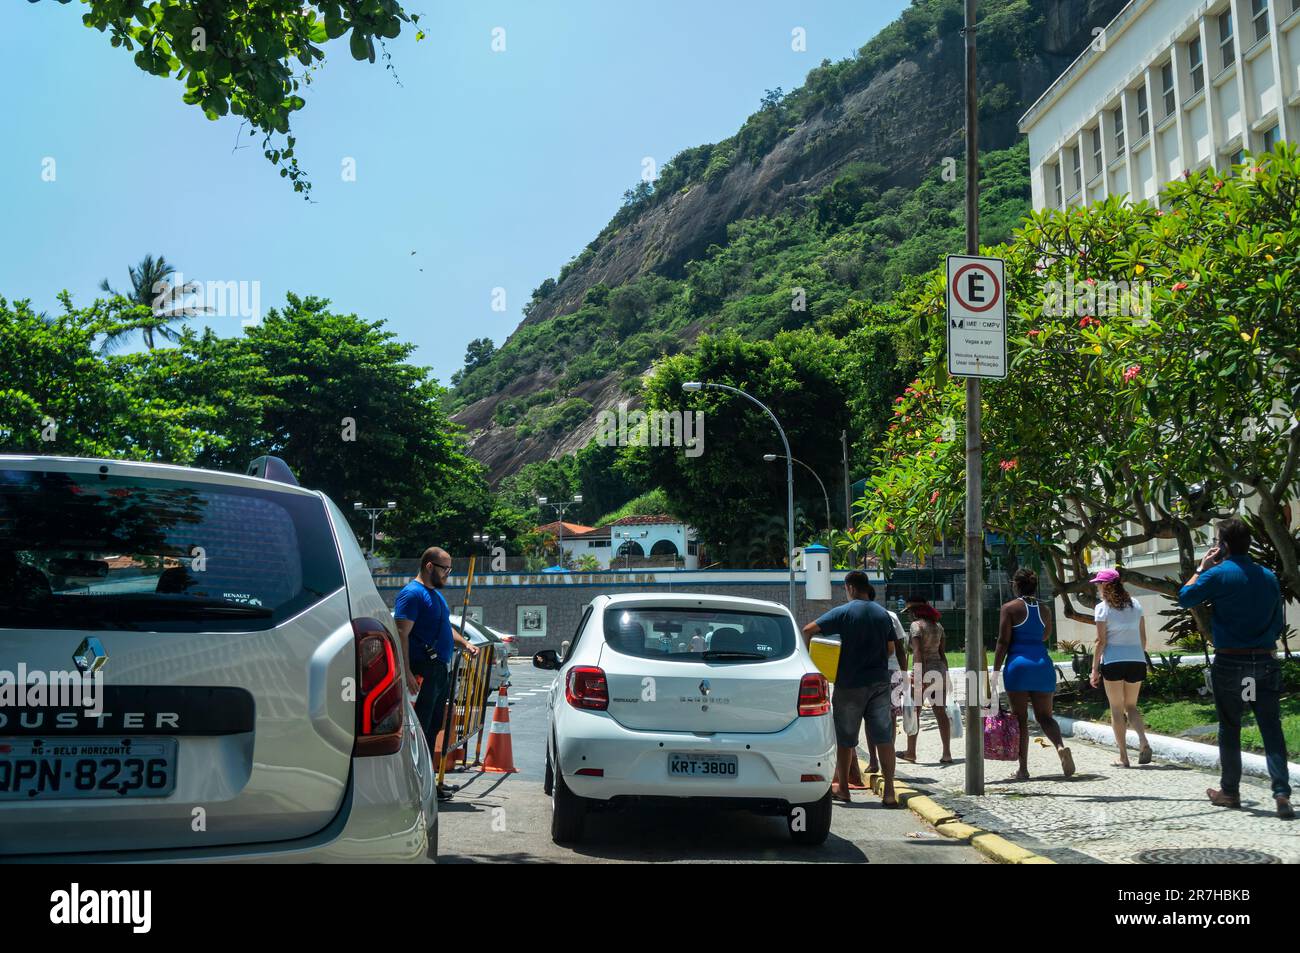 Cars and tourists arriving at General Tiburcio square parking area nearby Praia Vermelha beach in Urca district under summer morning sunny blue sky. Stock Photo